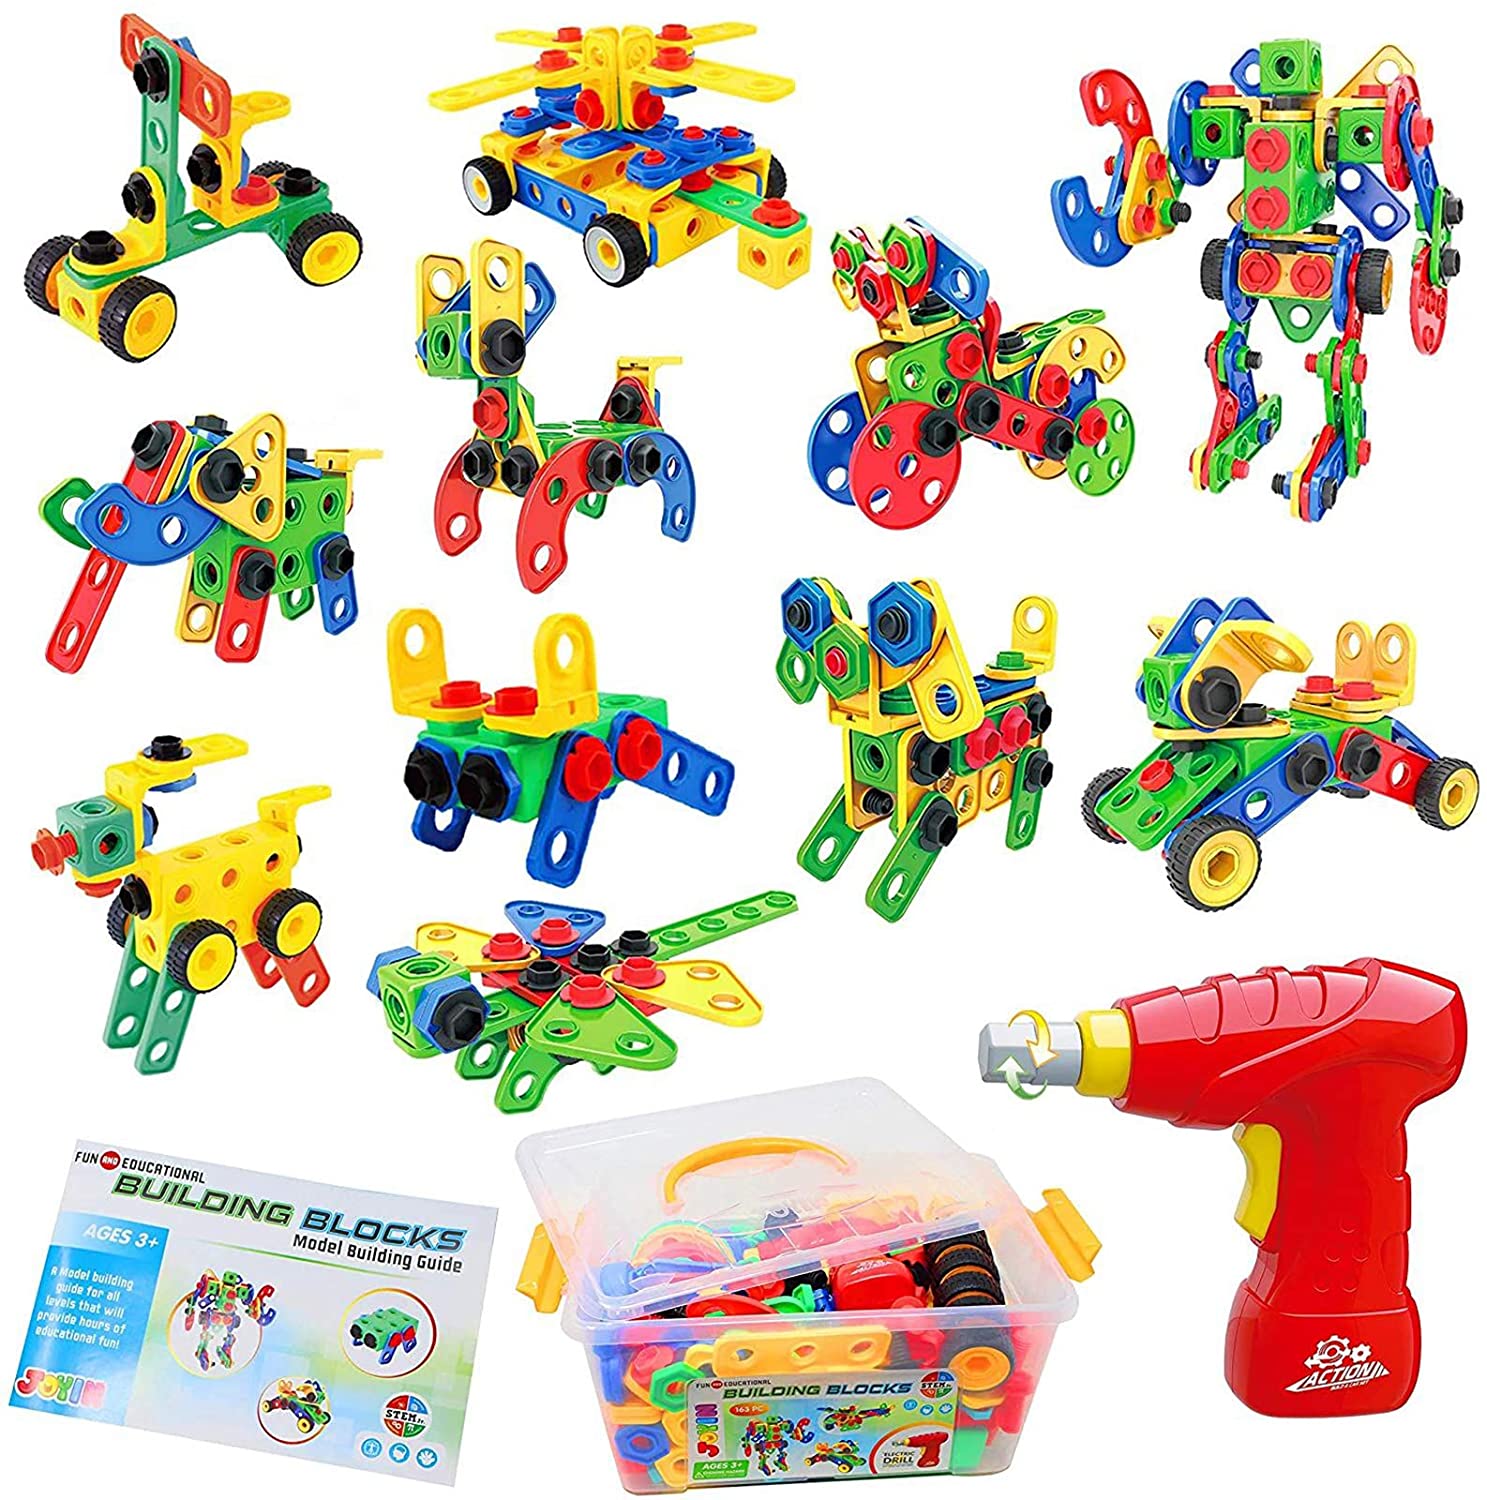 JOYIN 163 Pcs STEM Toys Kit with Electric Drill and Storage Box Set Educational Construction Engineering Building Block Creative Game Toy for Ages 3 Year Old Boys & Girls 